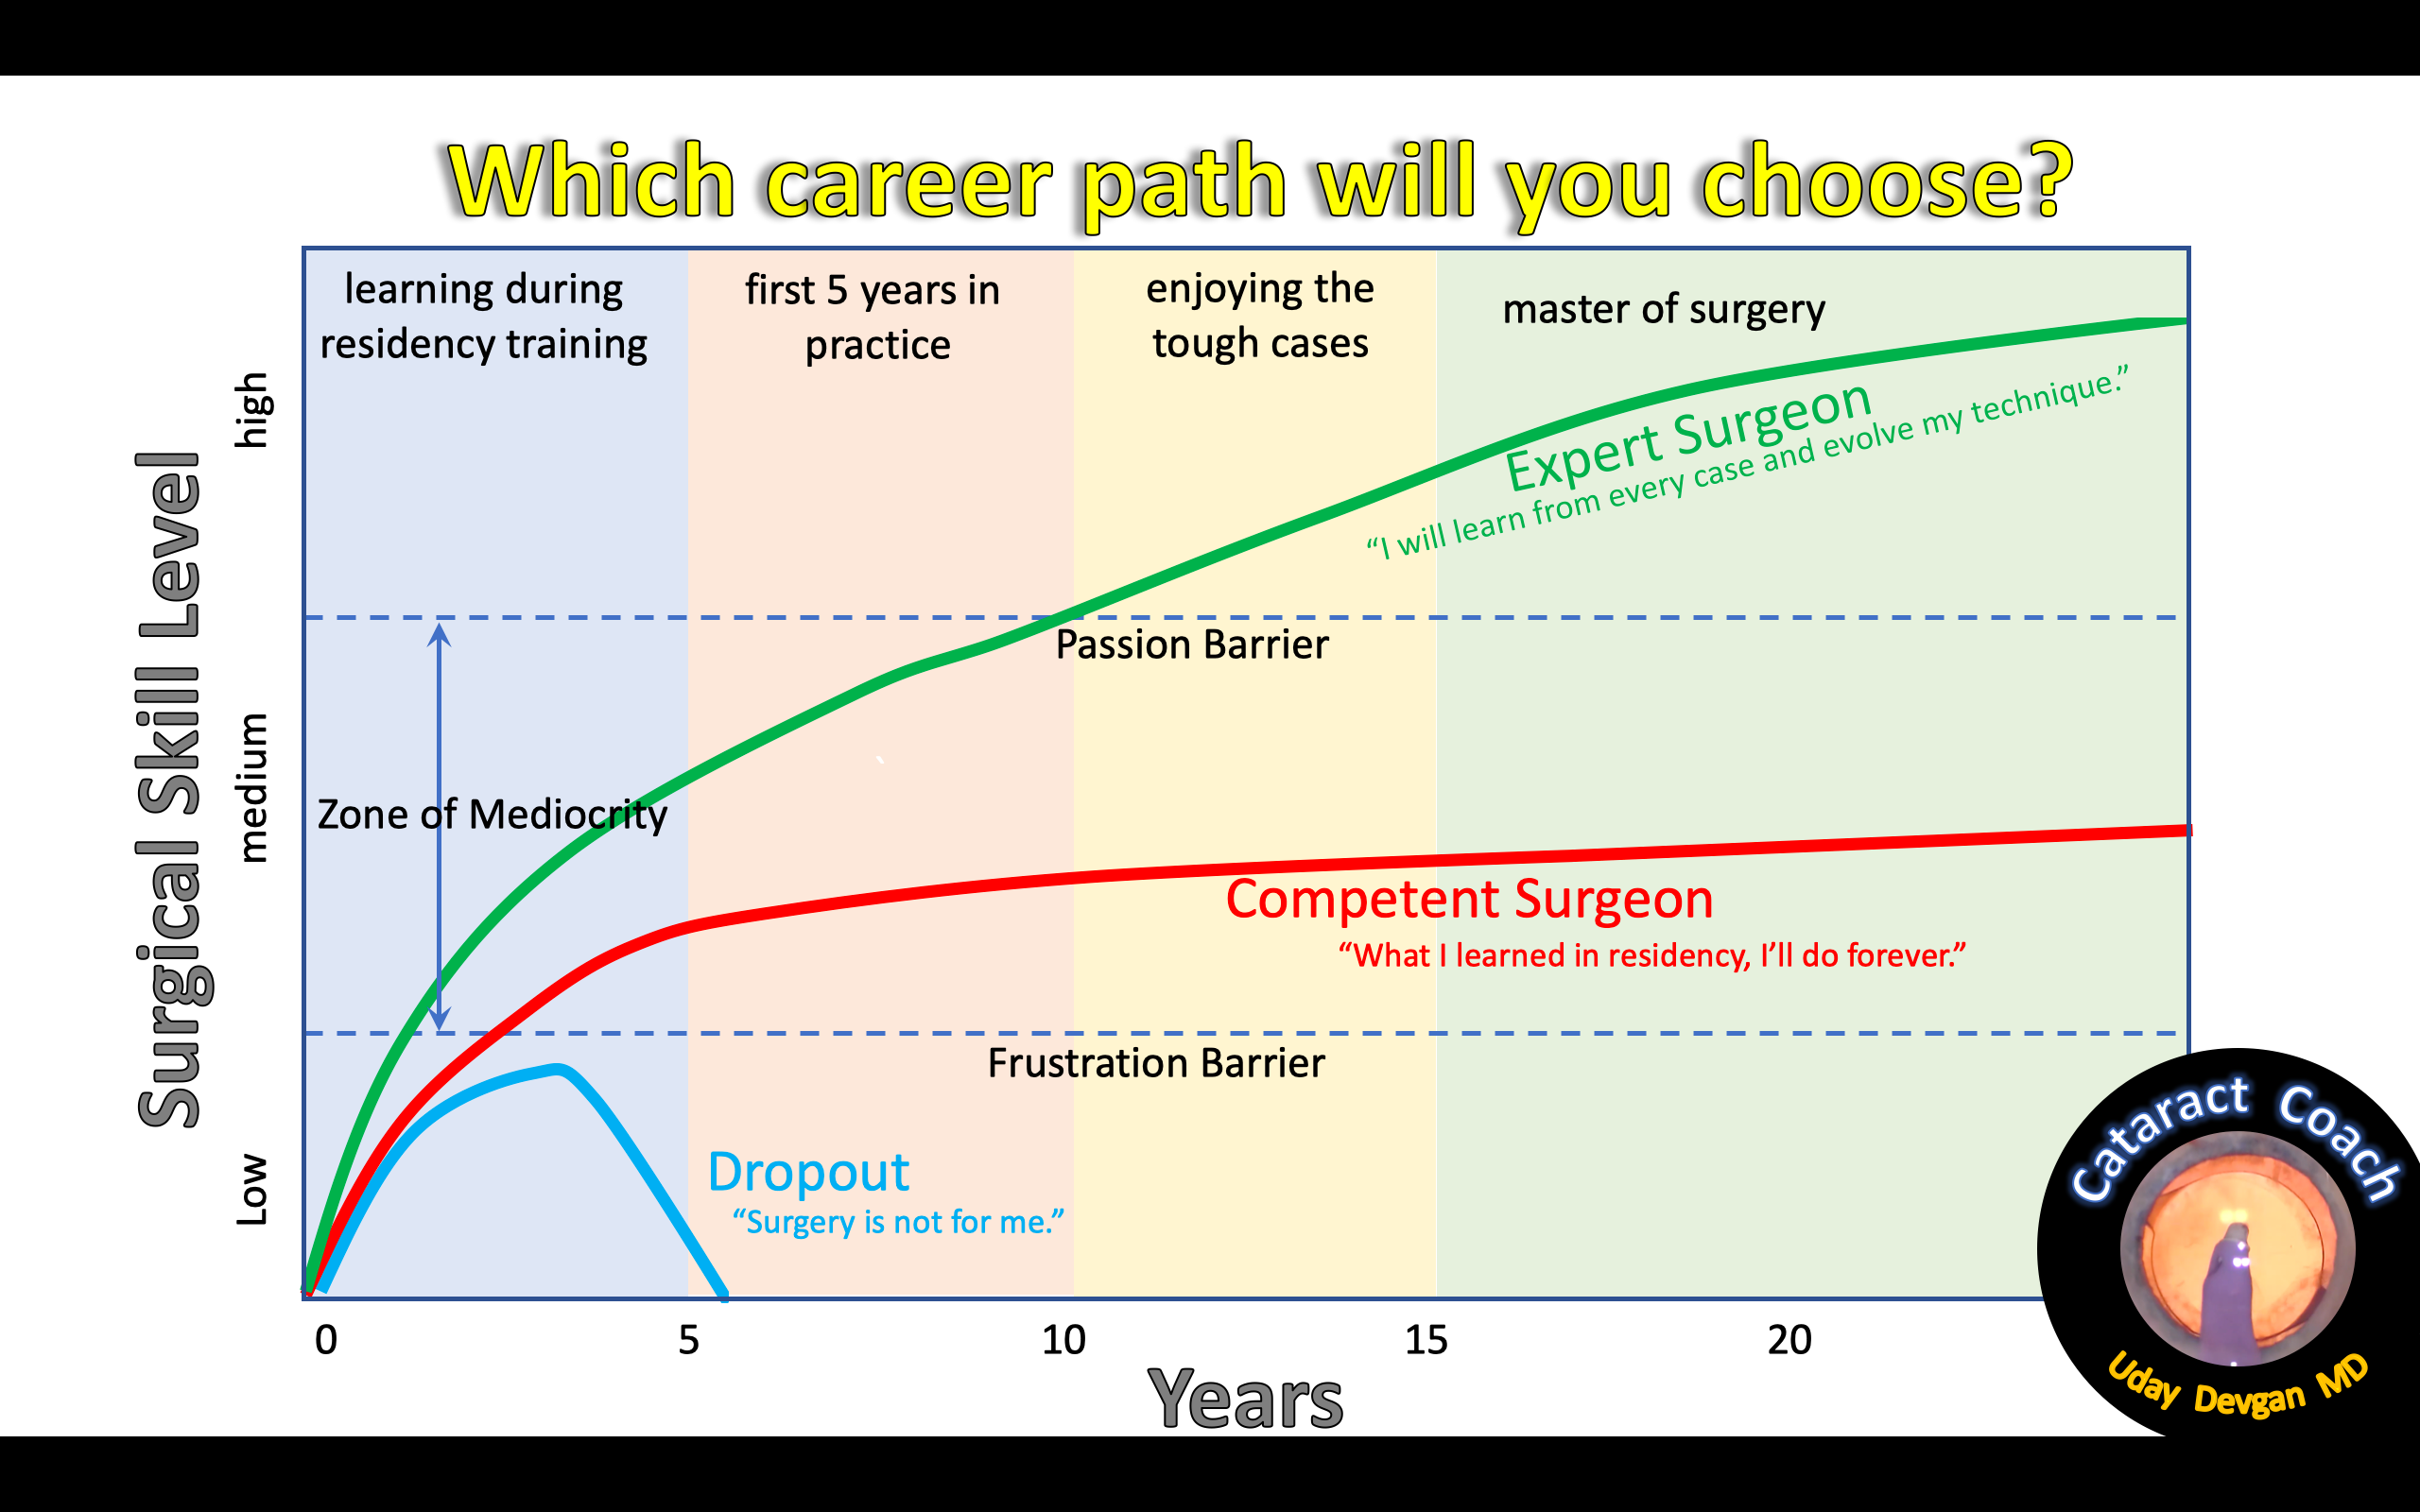 learning curve over the career of an ophthalmologist for cataract surgery